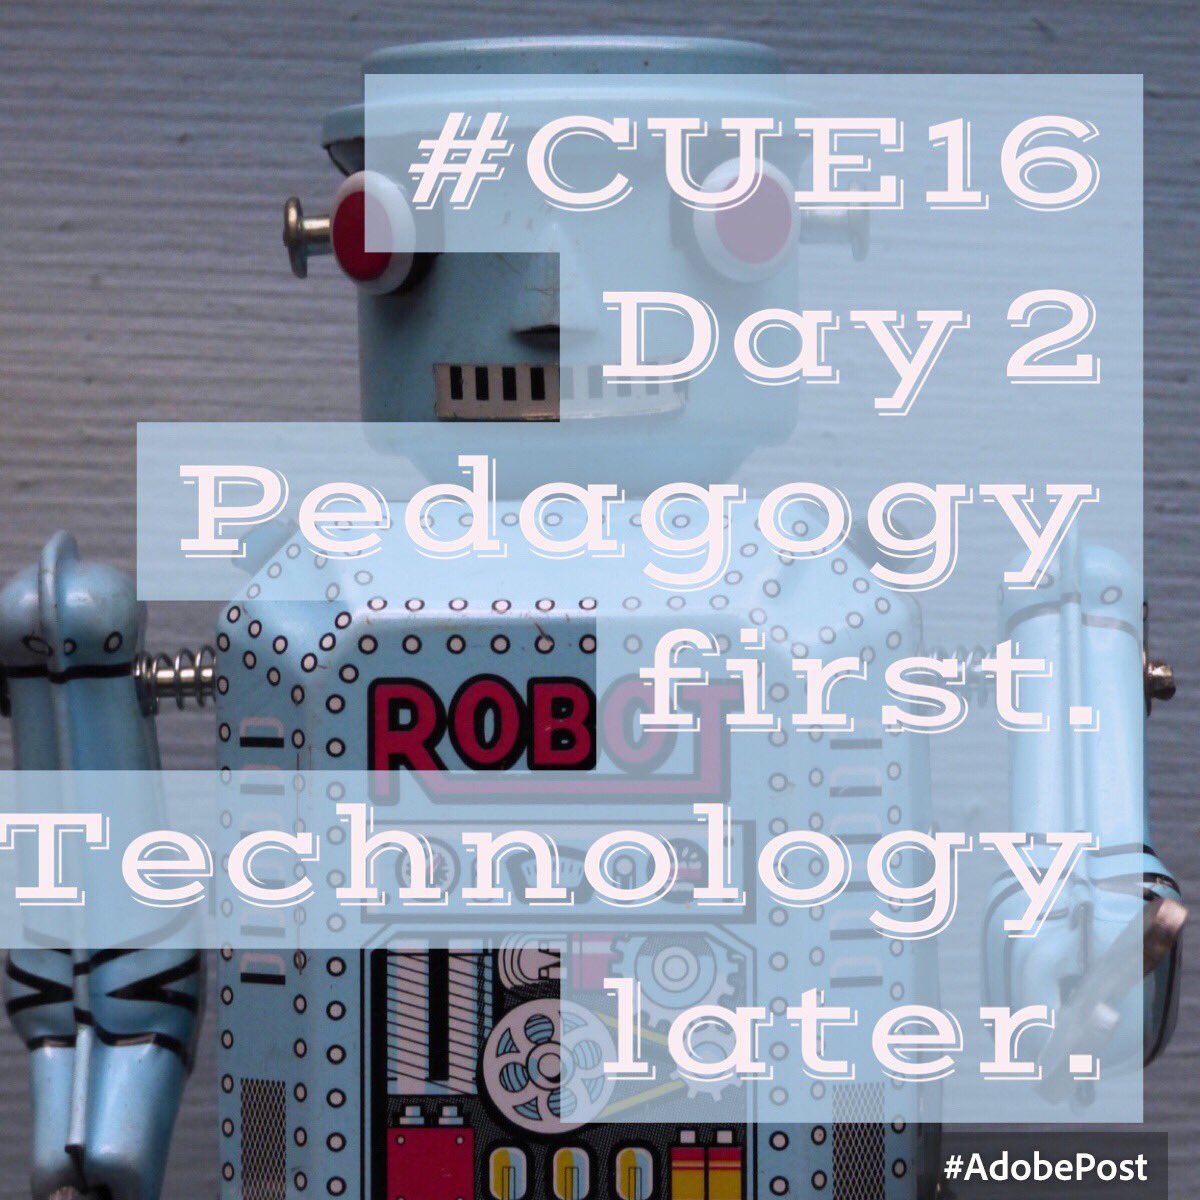 Personal takeaway from day 2 #cue16 #adobepost #edtechat